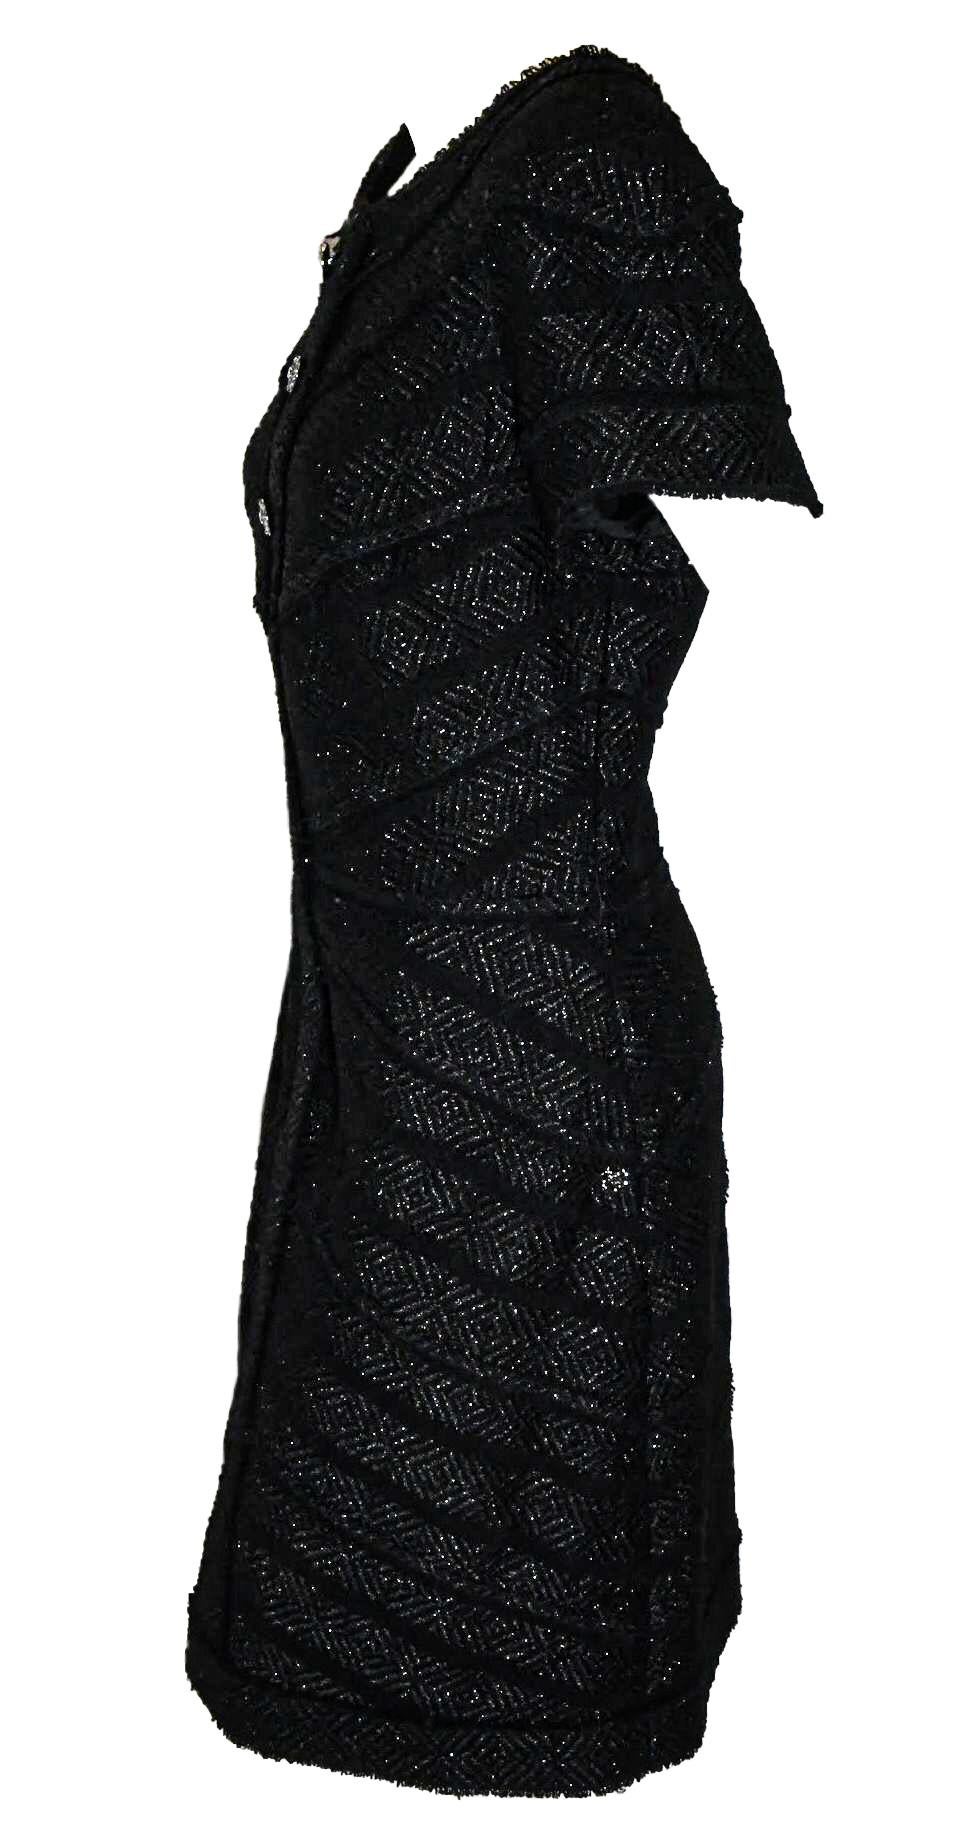 Chanel black tweed scoop collar chevron design with frayed edges dress from the fall 2008 collection contains 3 Chanel logo buttons a hidden zipper at front for closure.  This dress includes two side pockets at the hip with 2 Chanel logo buttons. 